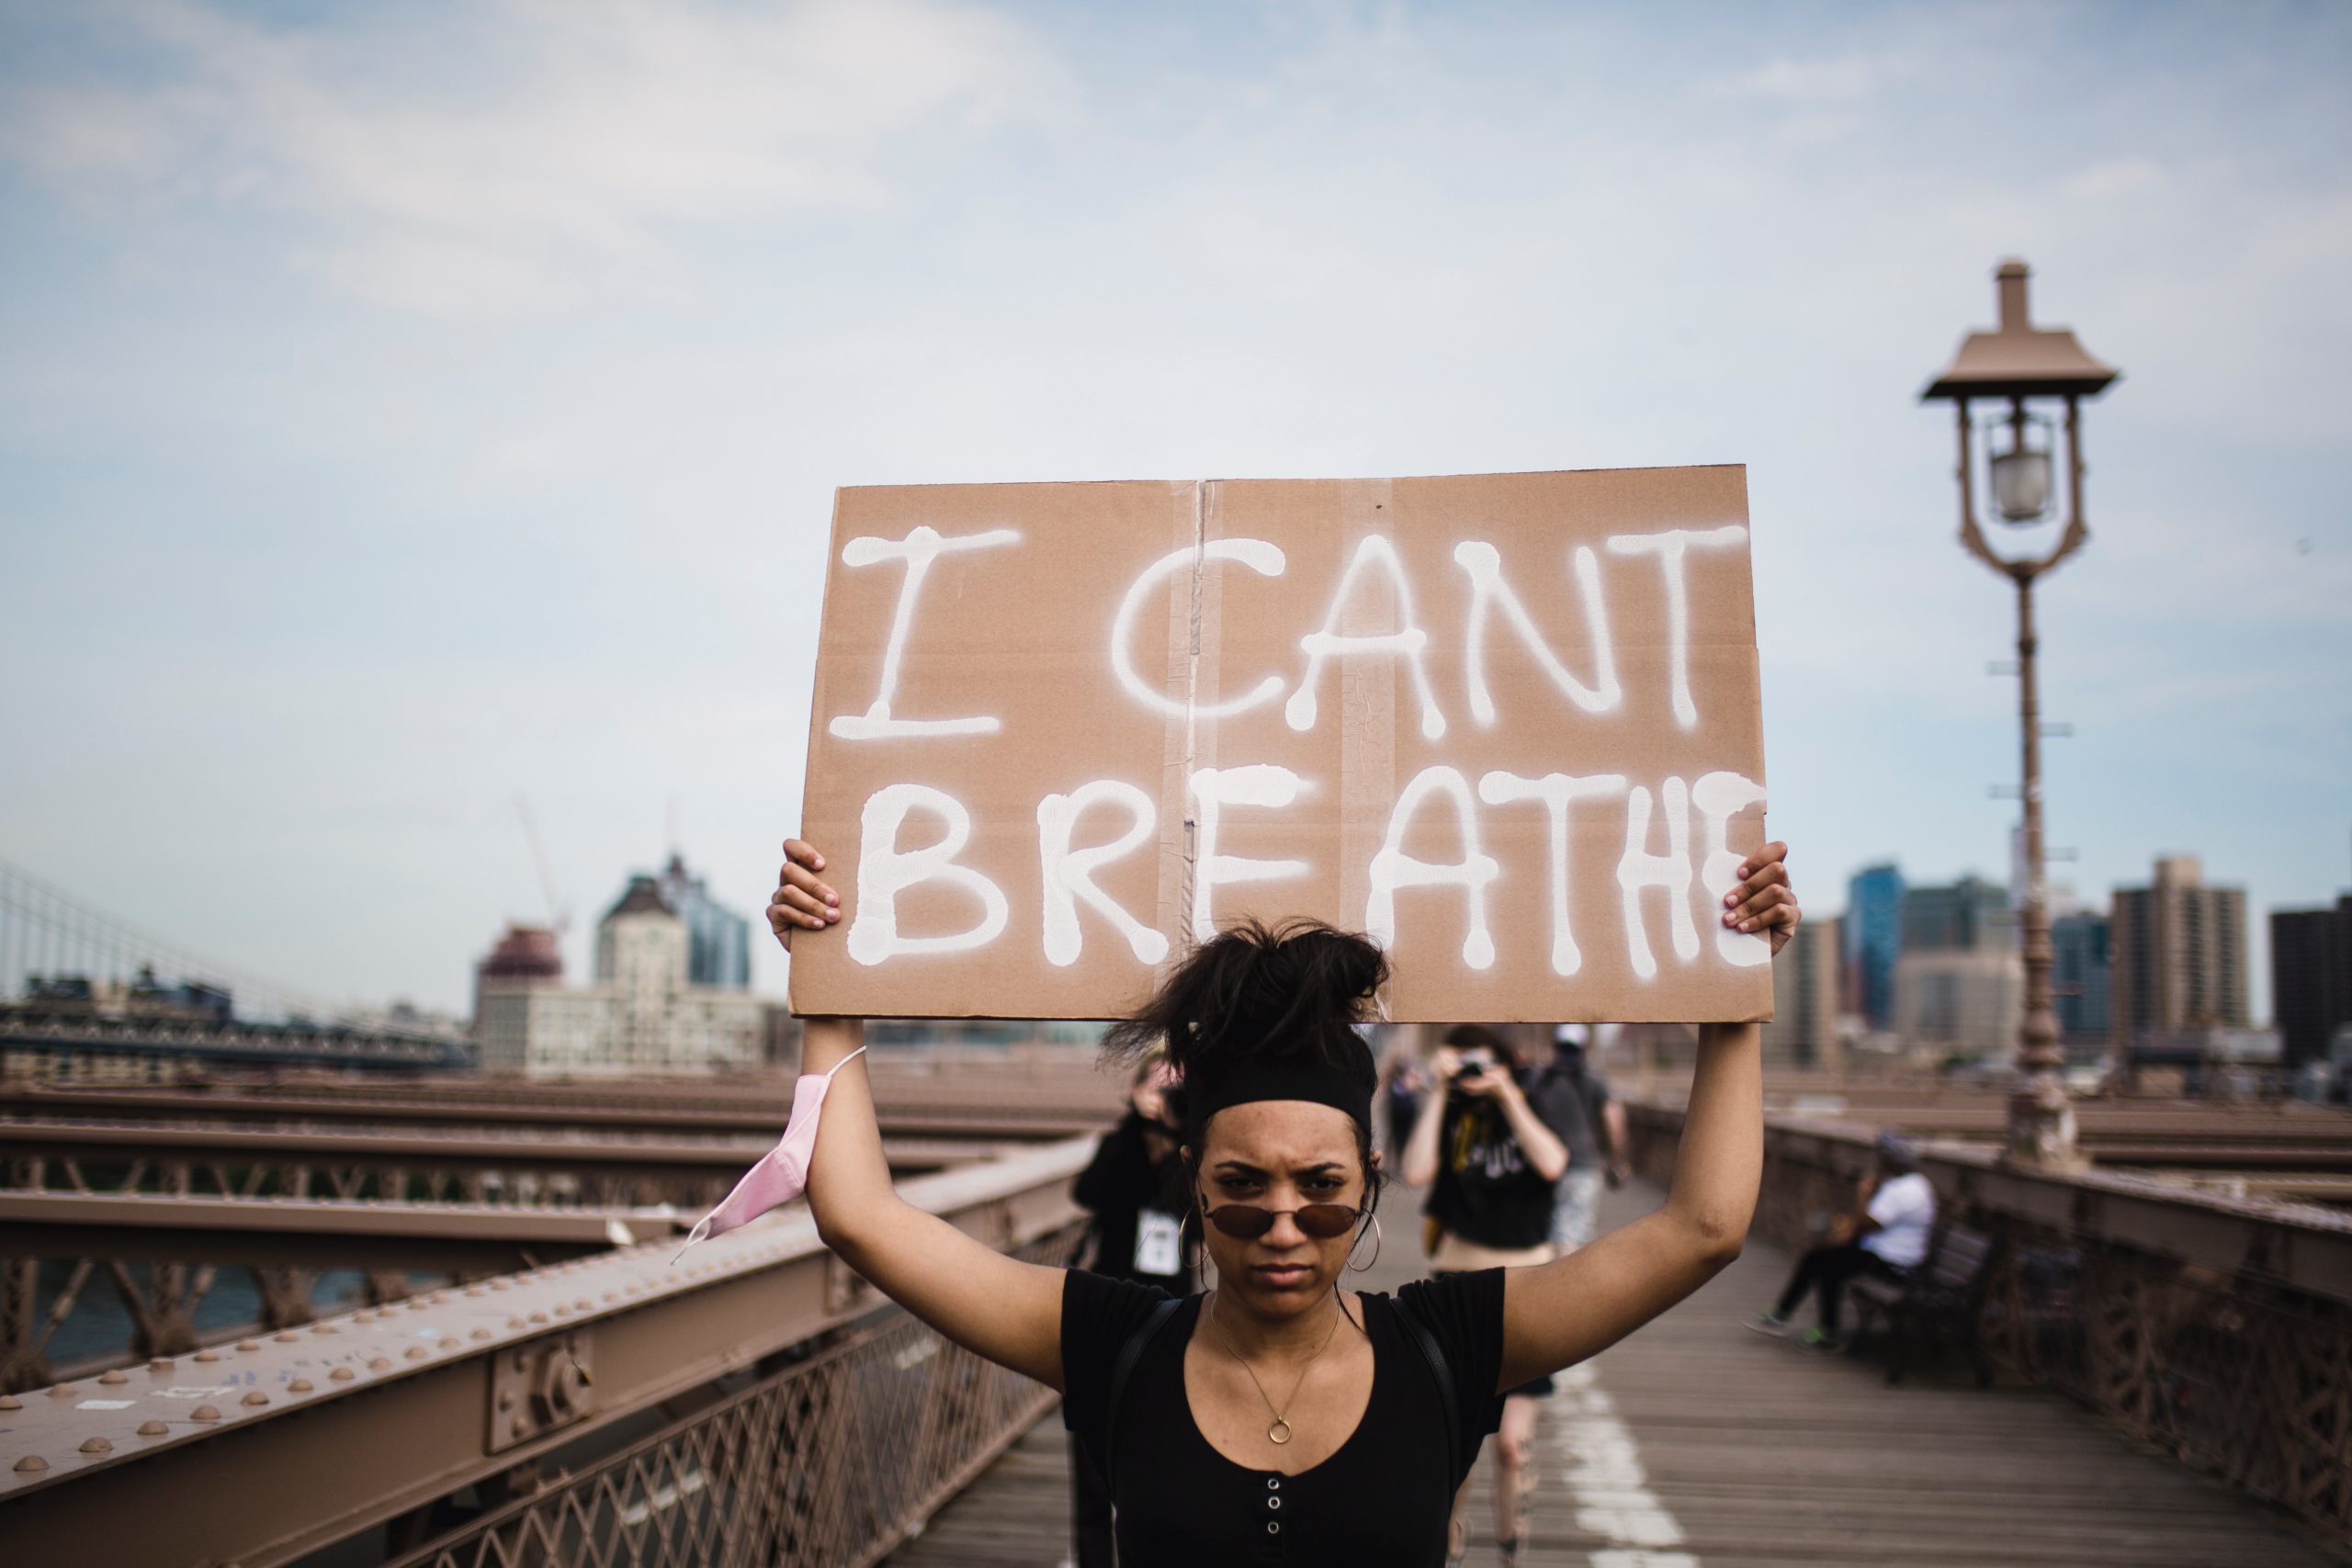 Protester with "I can't breath" sign